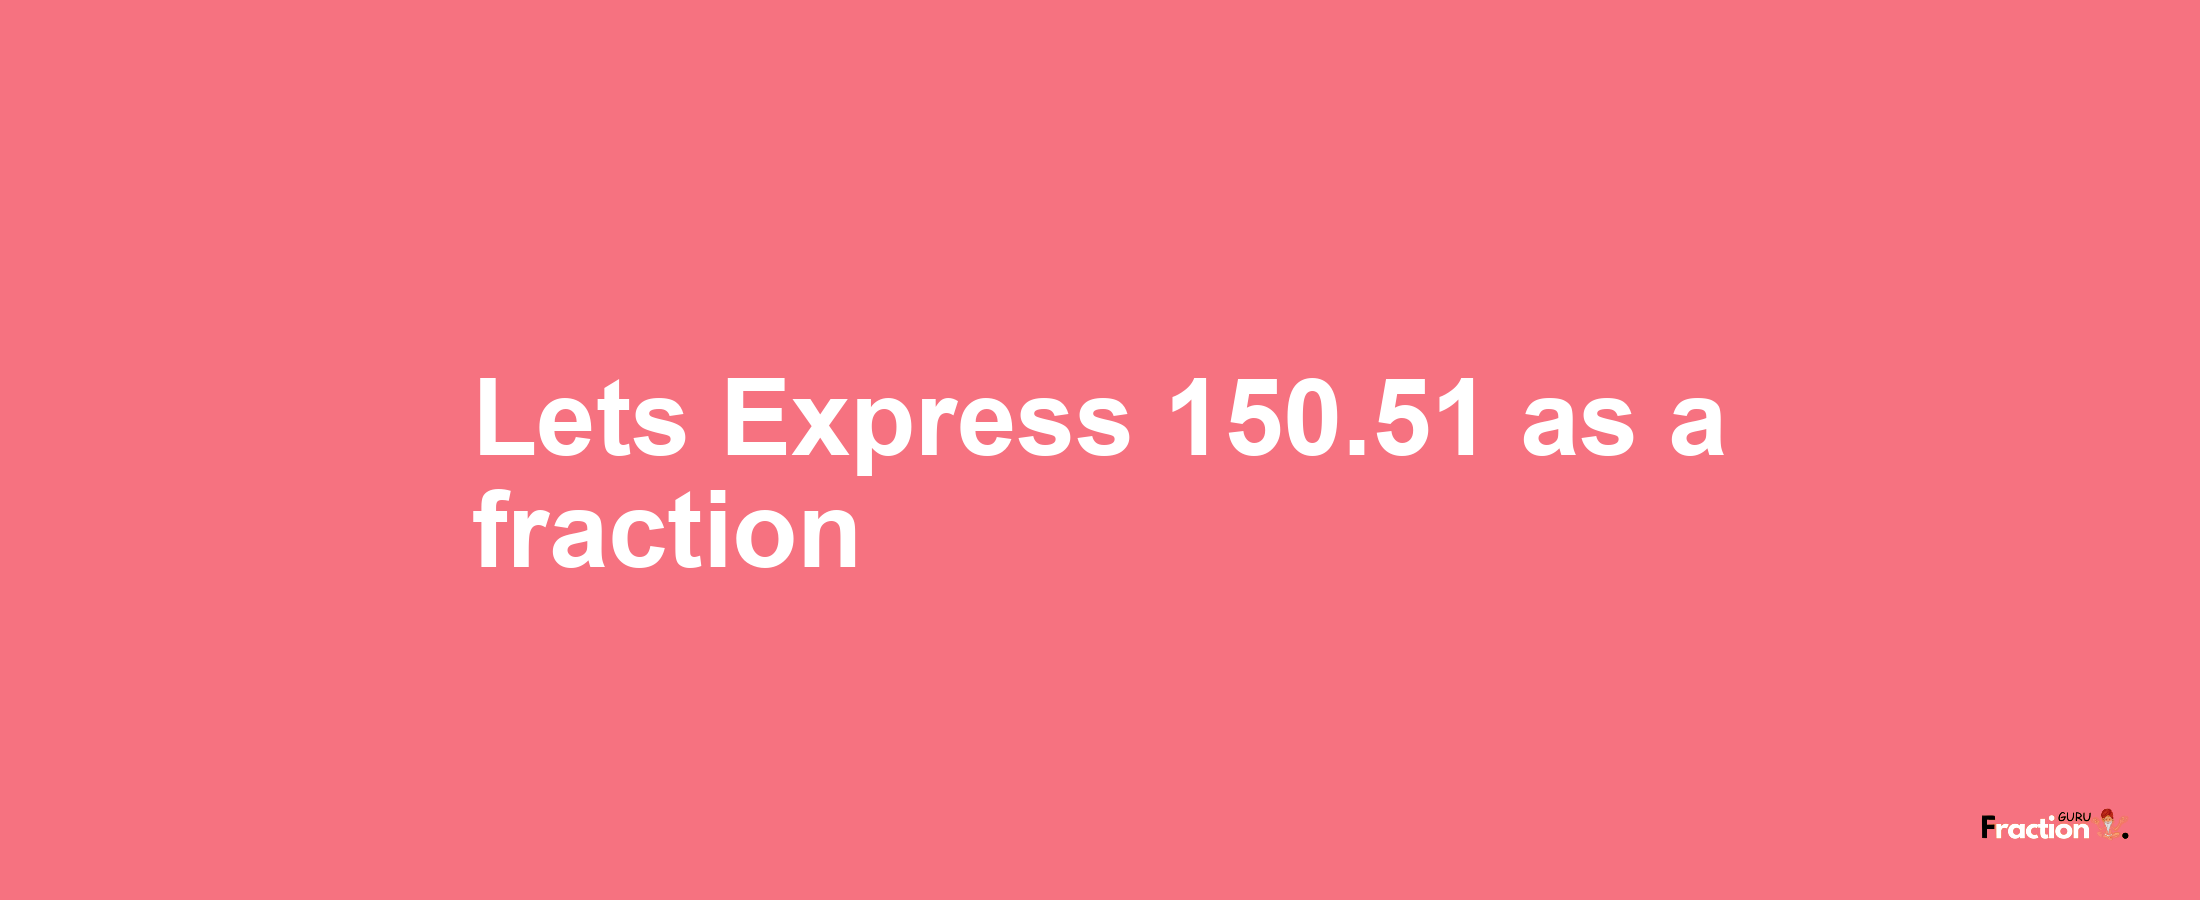 Lets Express 150.51 as afraction